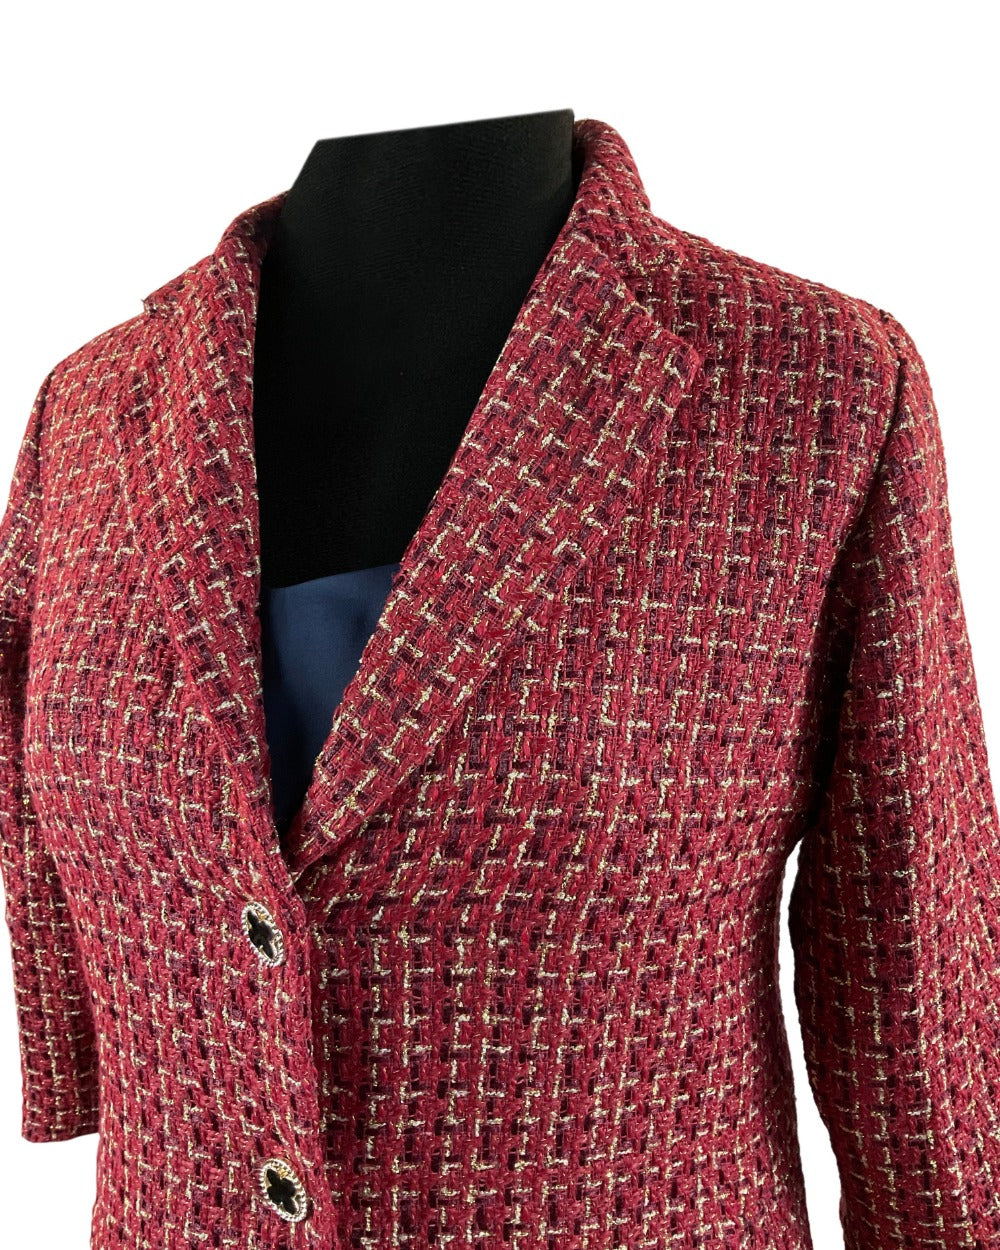 NEW red tweed wool coats, women's winter coats in plus sizes, Perth, Au